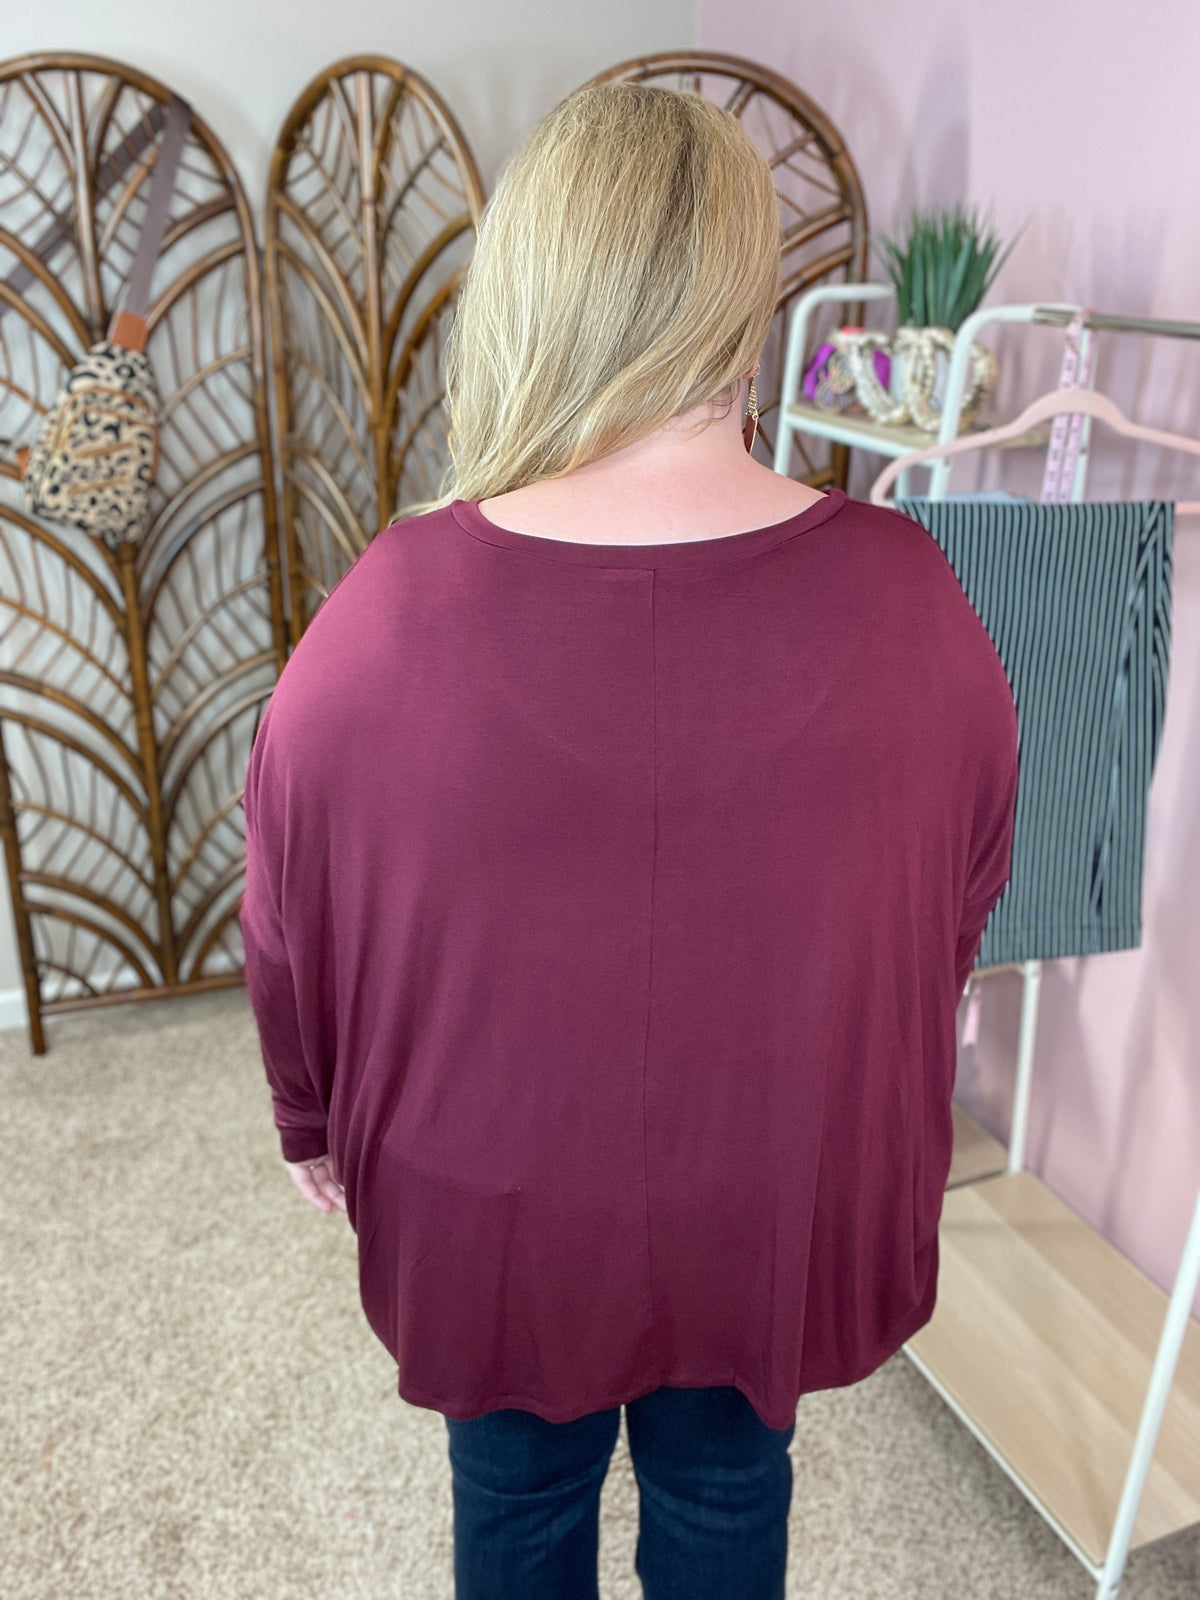 Comforts of Fall Slouchy Top - Burgundy